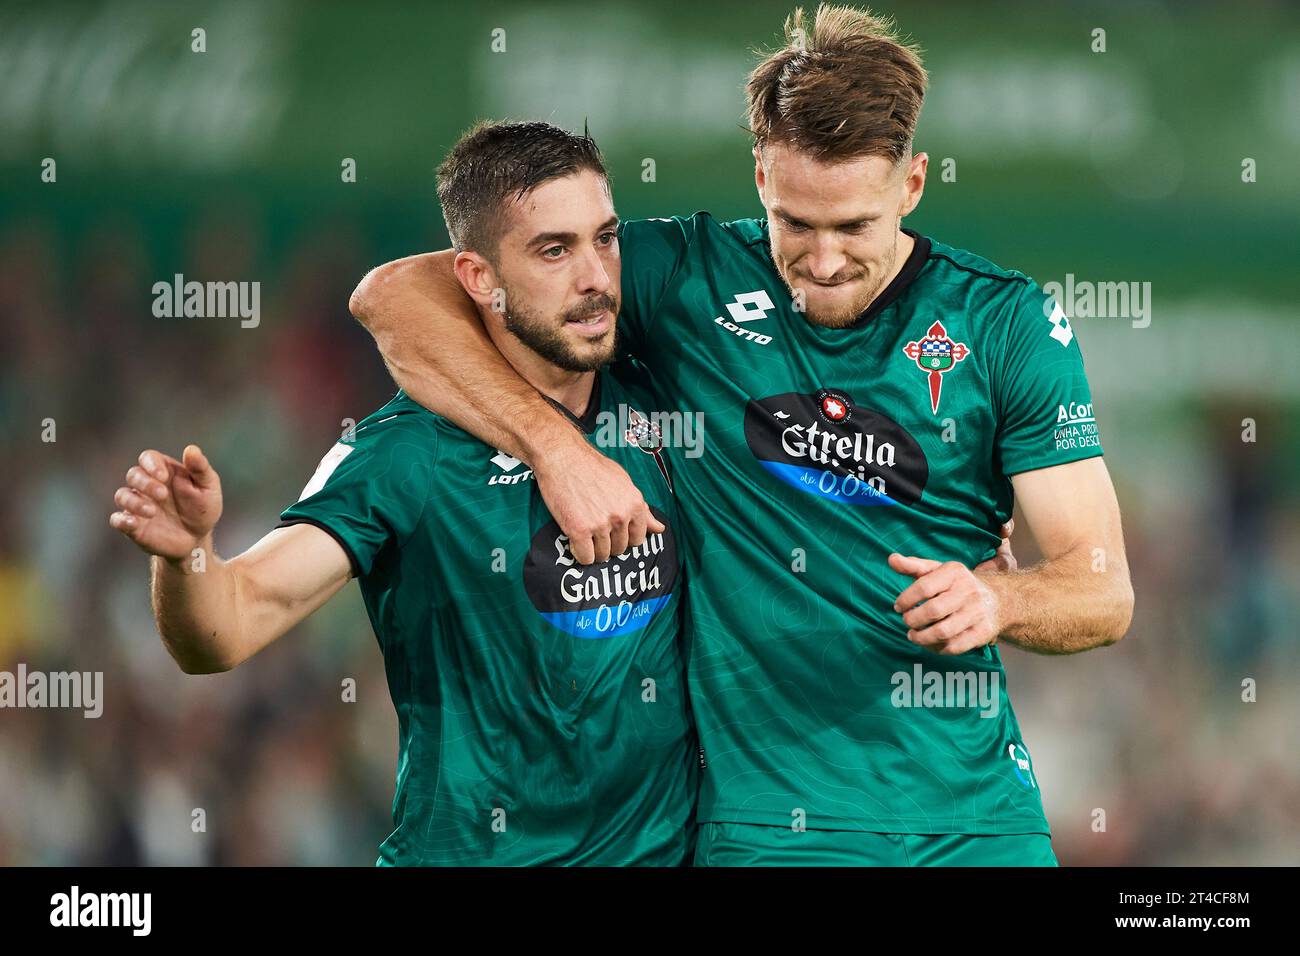 Heber Pena of Racing Club Ferrol celebrates after scoring his team's second goal during the LaLiga Hypermotion match between Real Racing Club and Raci Stock Photo